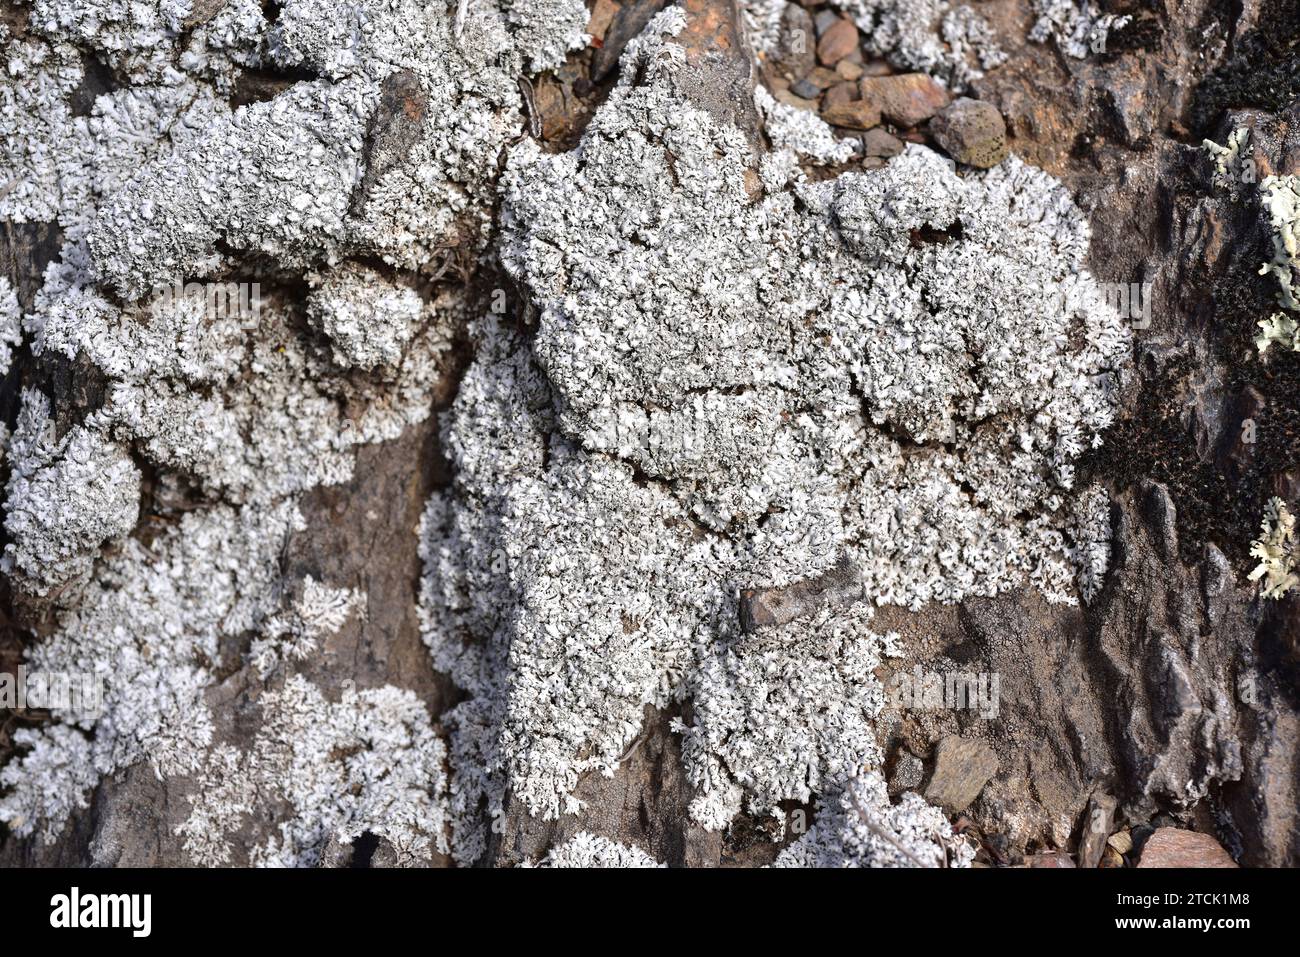 Physcia dubia is a foliose lichen that grows on siliceous rocks. This photo was taken in La Albera, Girona province, Catalonia, Spain. Stock Photo